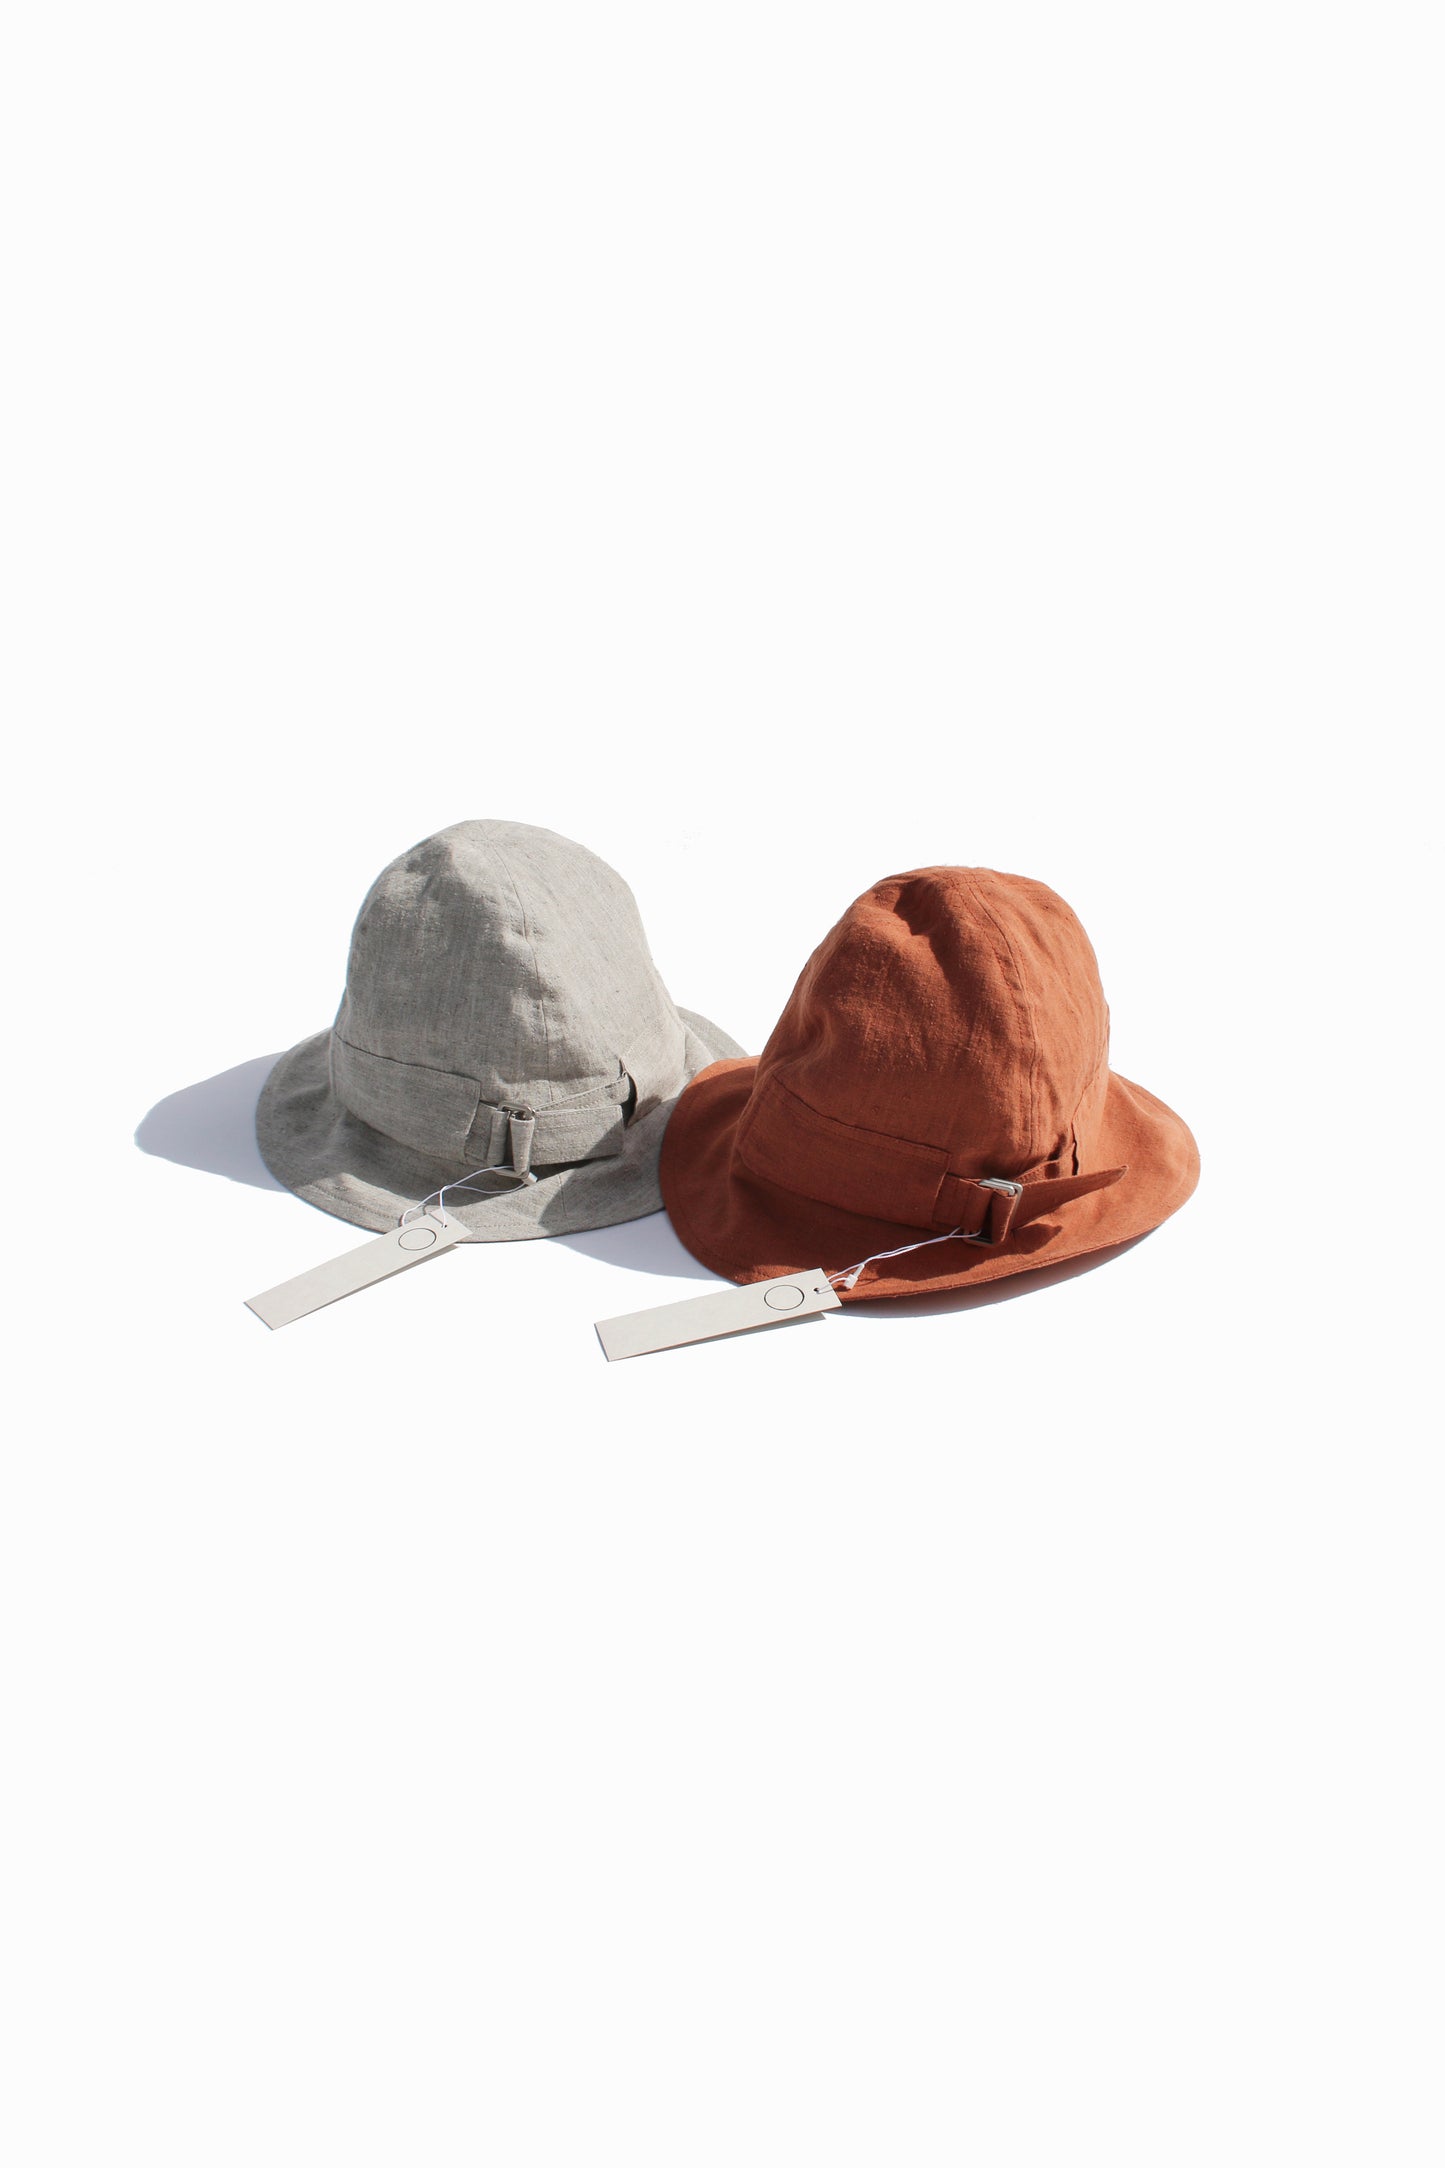 O PROJECT HEMP MELE CLOTH FISHER HAT - NATURAL / RED BRICK